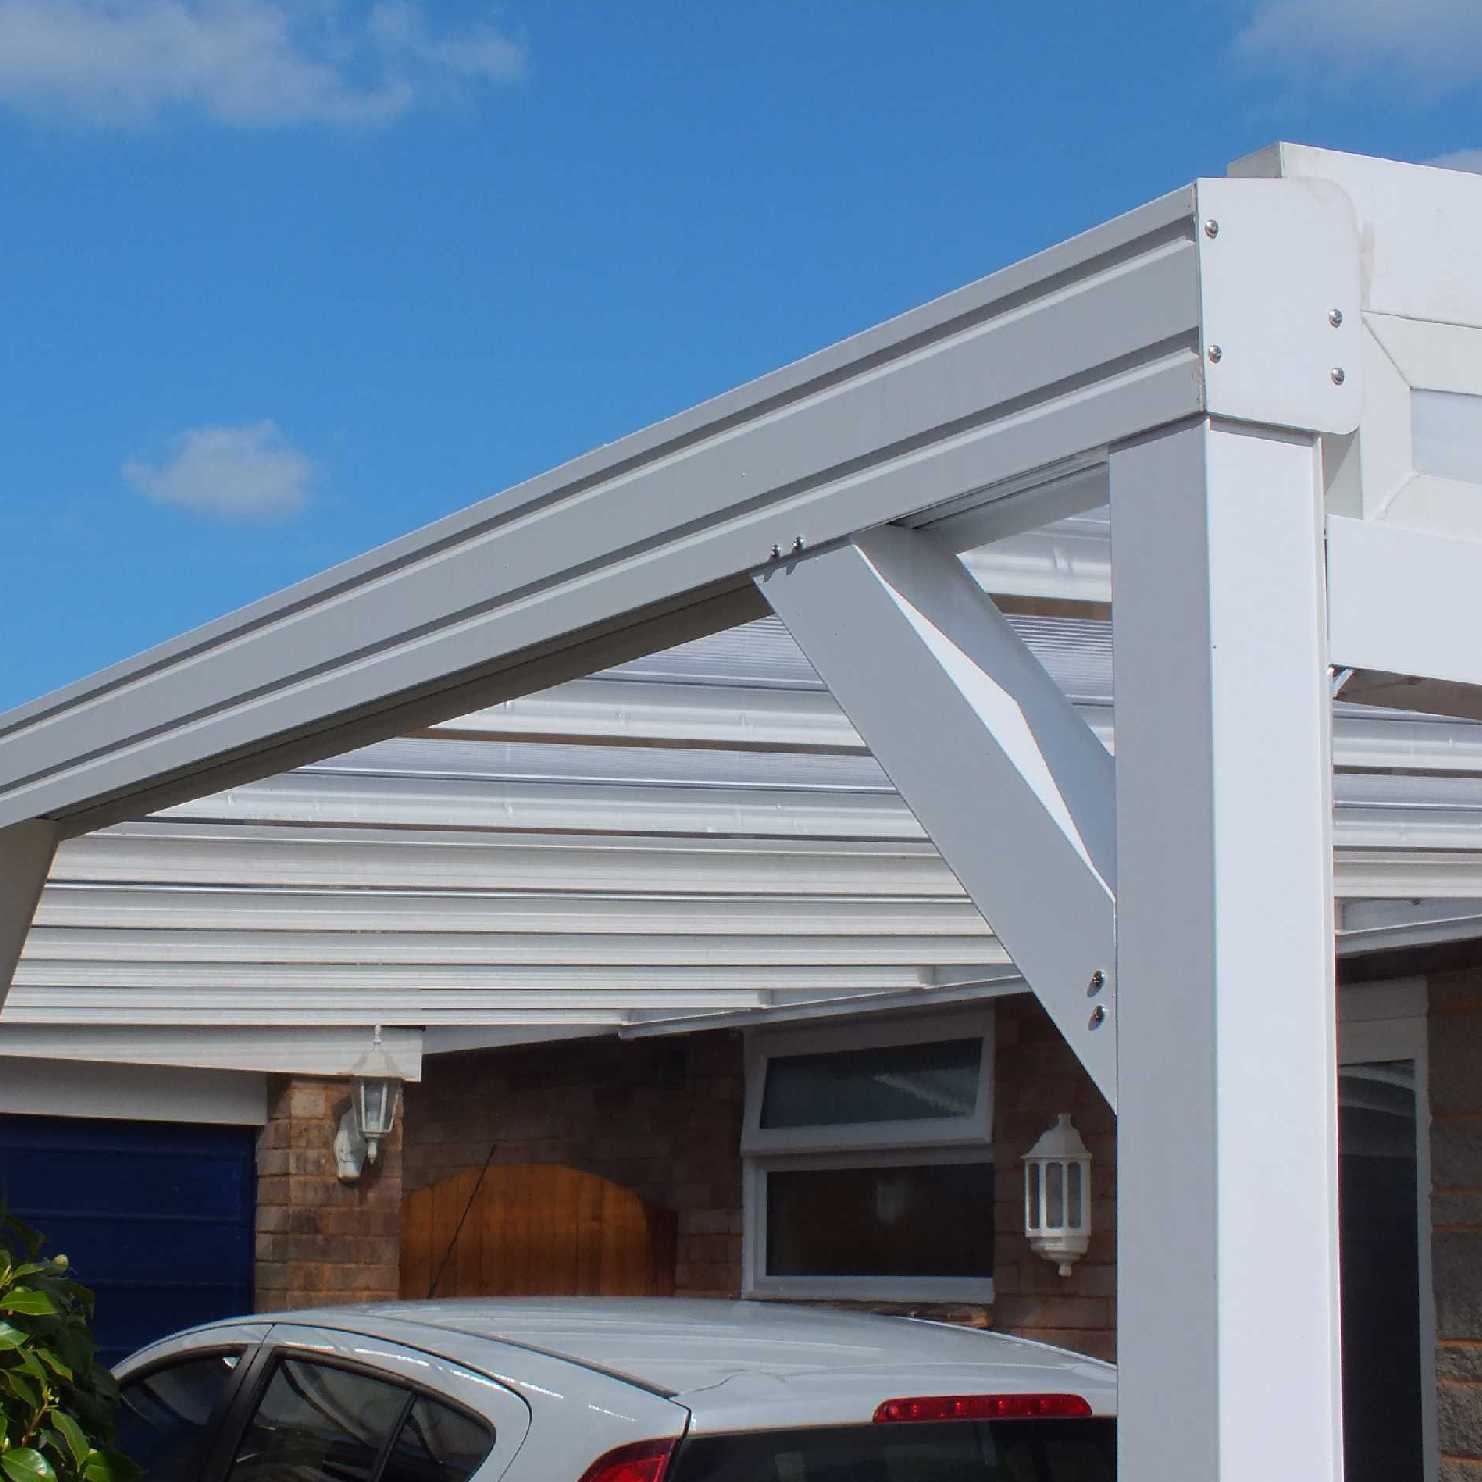 Buy Omega Smart Lean-To Canopy, White with 16mm Polycarbonate Glazing - 6.3m (W) x 2.0m (P), (4) Supporting Posts online today